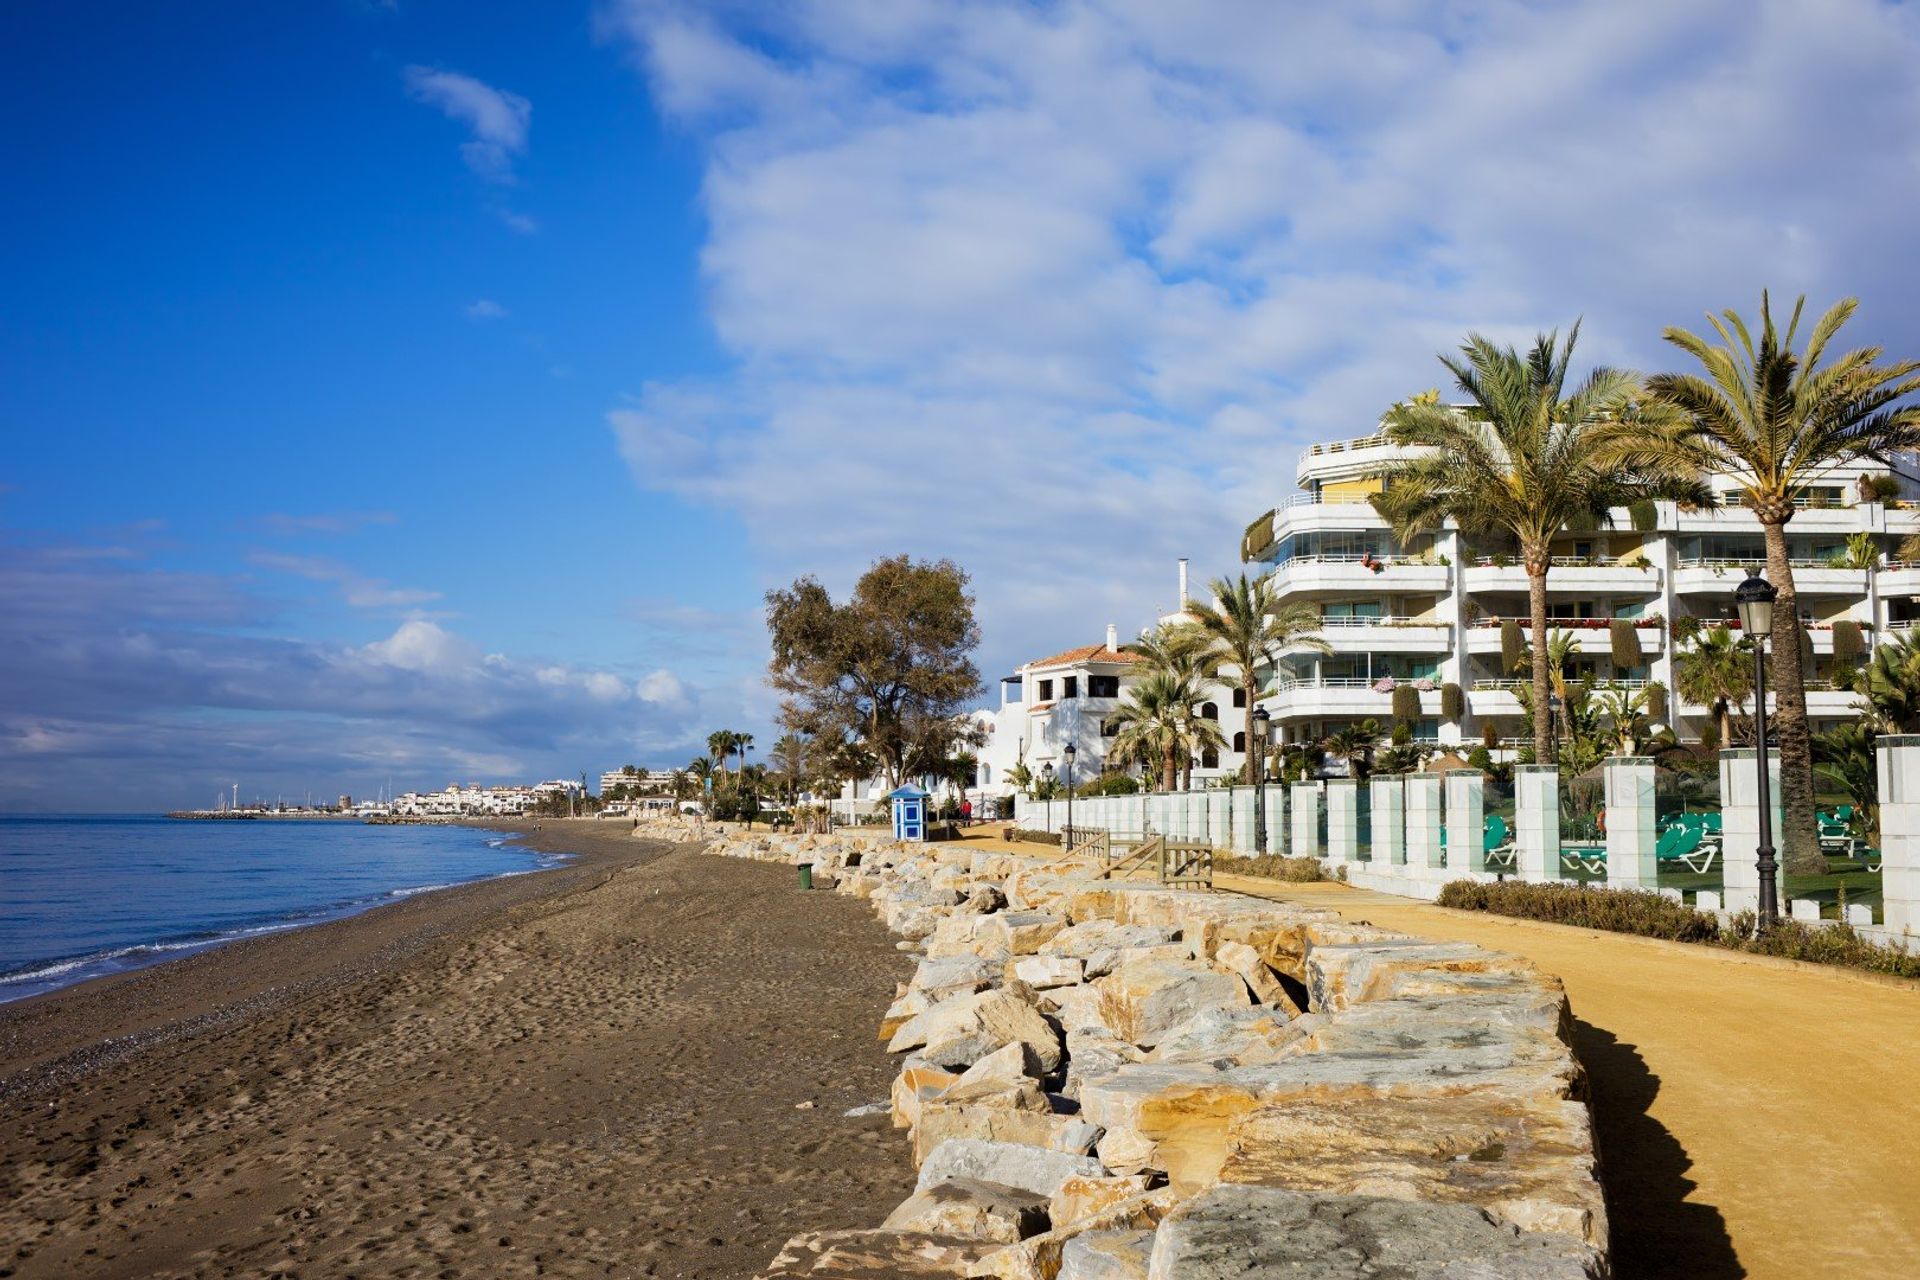 Have a relaxing stroll down the beach promenade with a backdrop of the sparkling Mediterranean